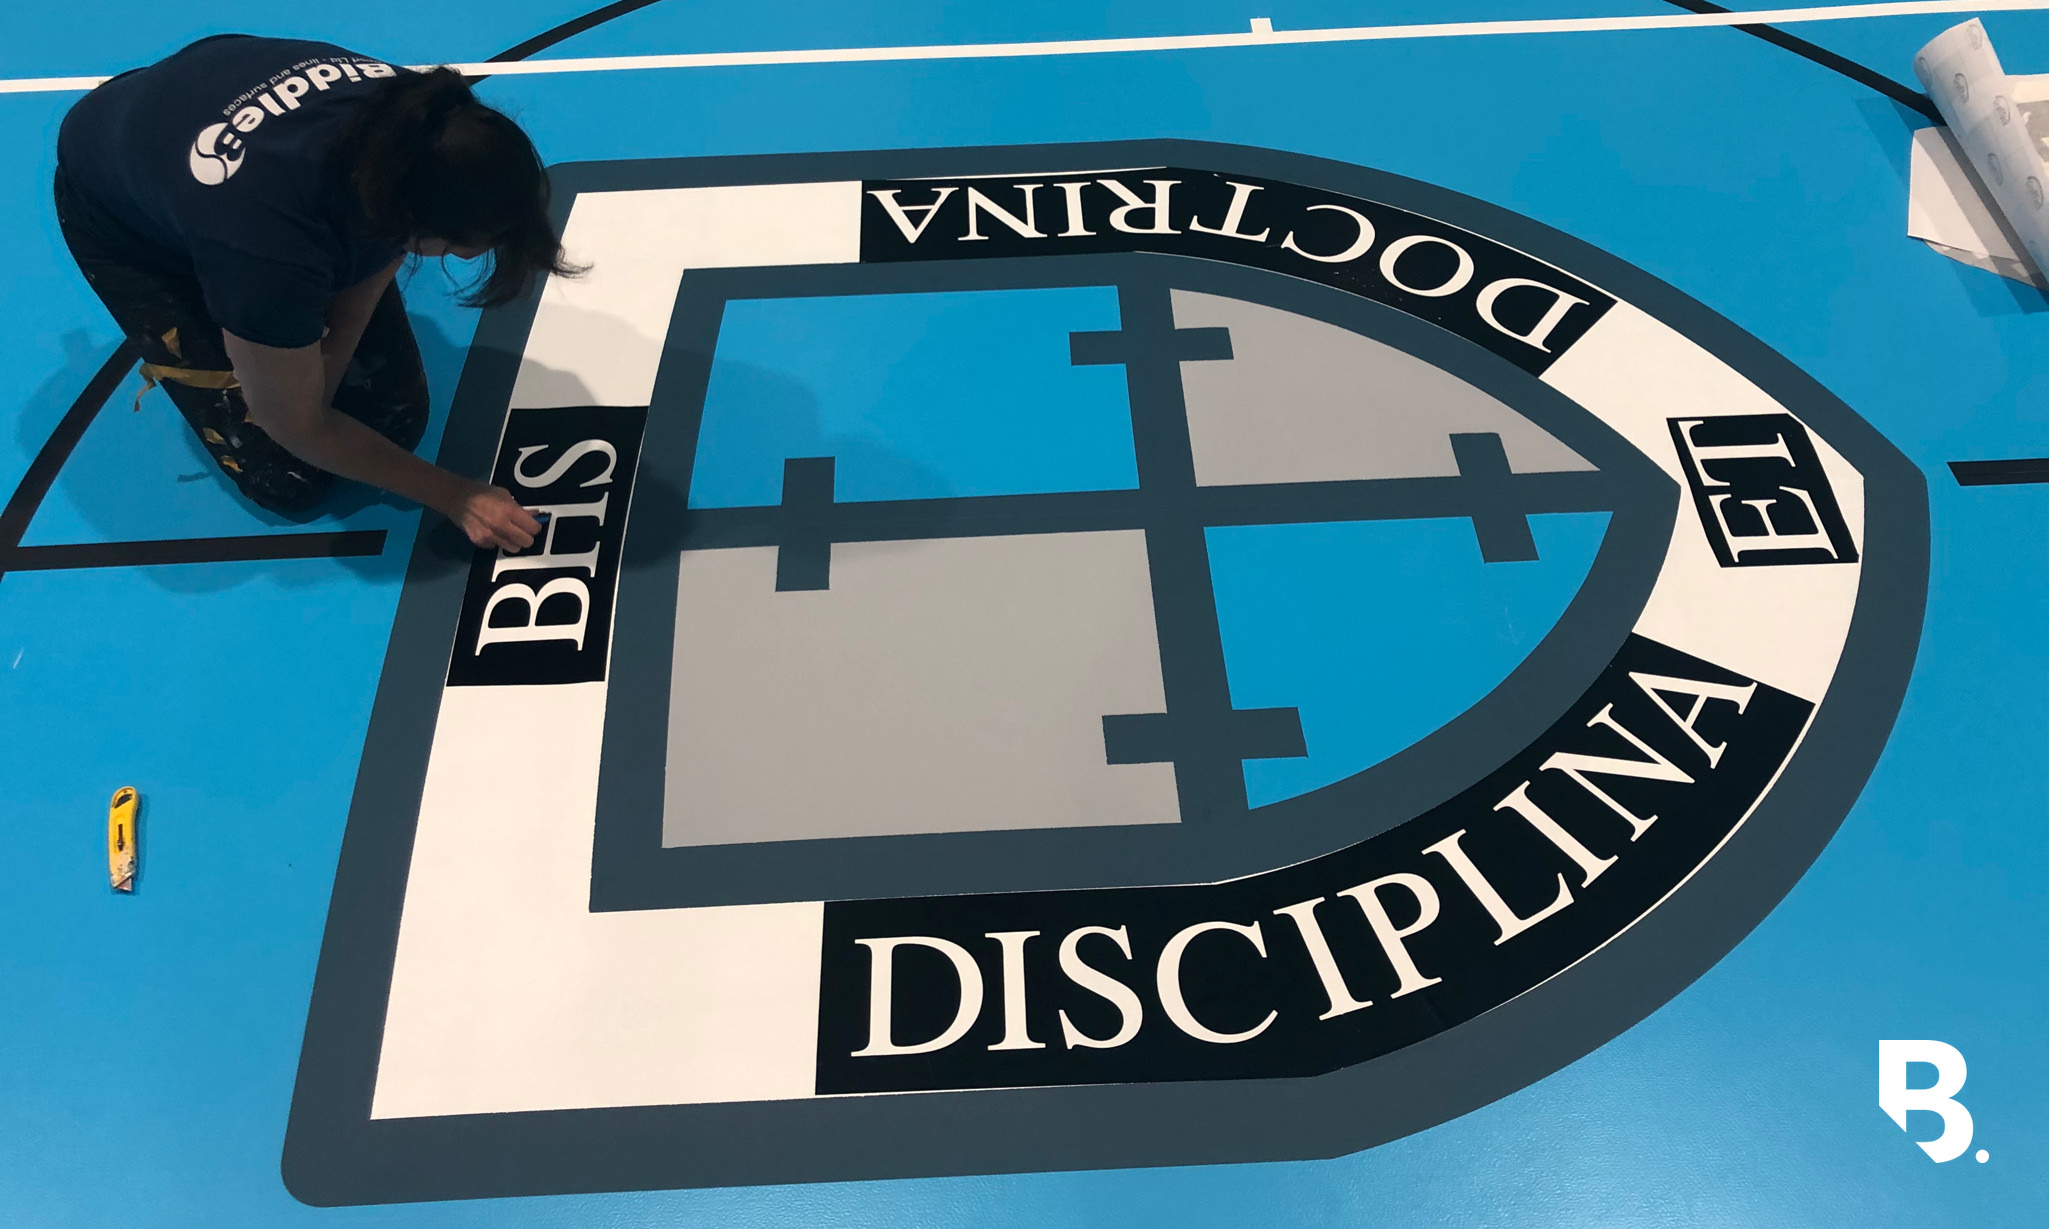 We paint School logos on 50% of the sports floors we court mark